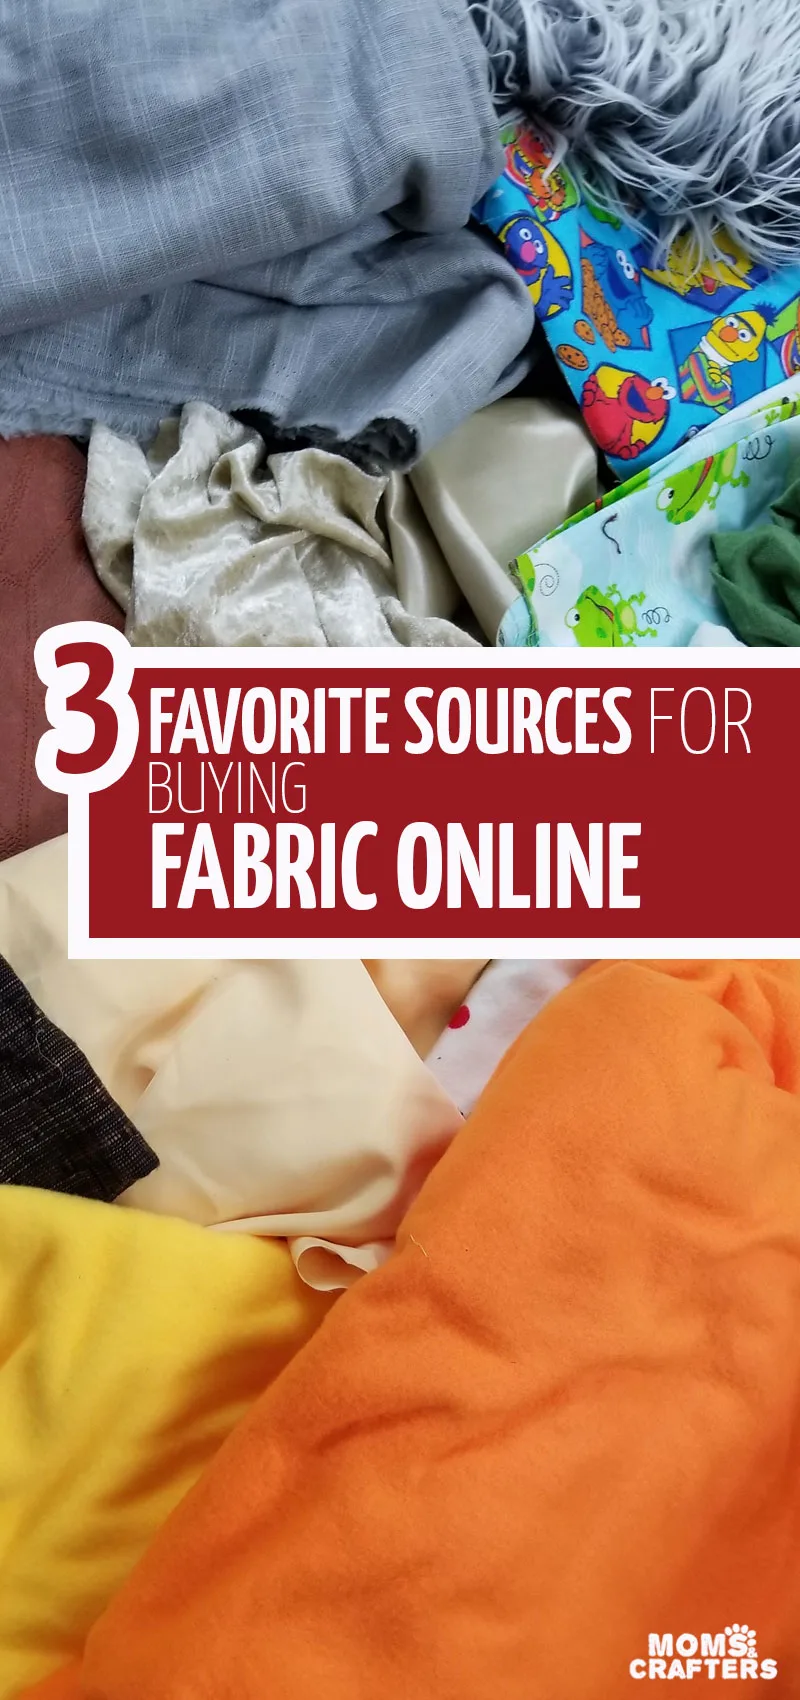 Click for a list of the best place to buy fabrics online for each need! This post includes sewing tips for beginners to help you source quality fabrics online. #sewing #diy #crafts